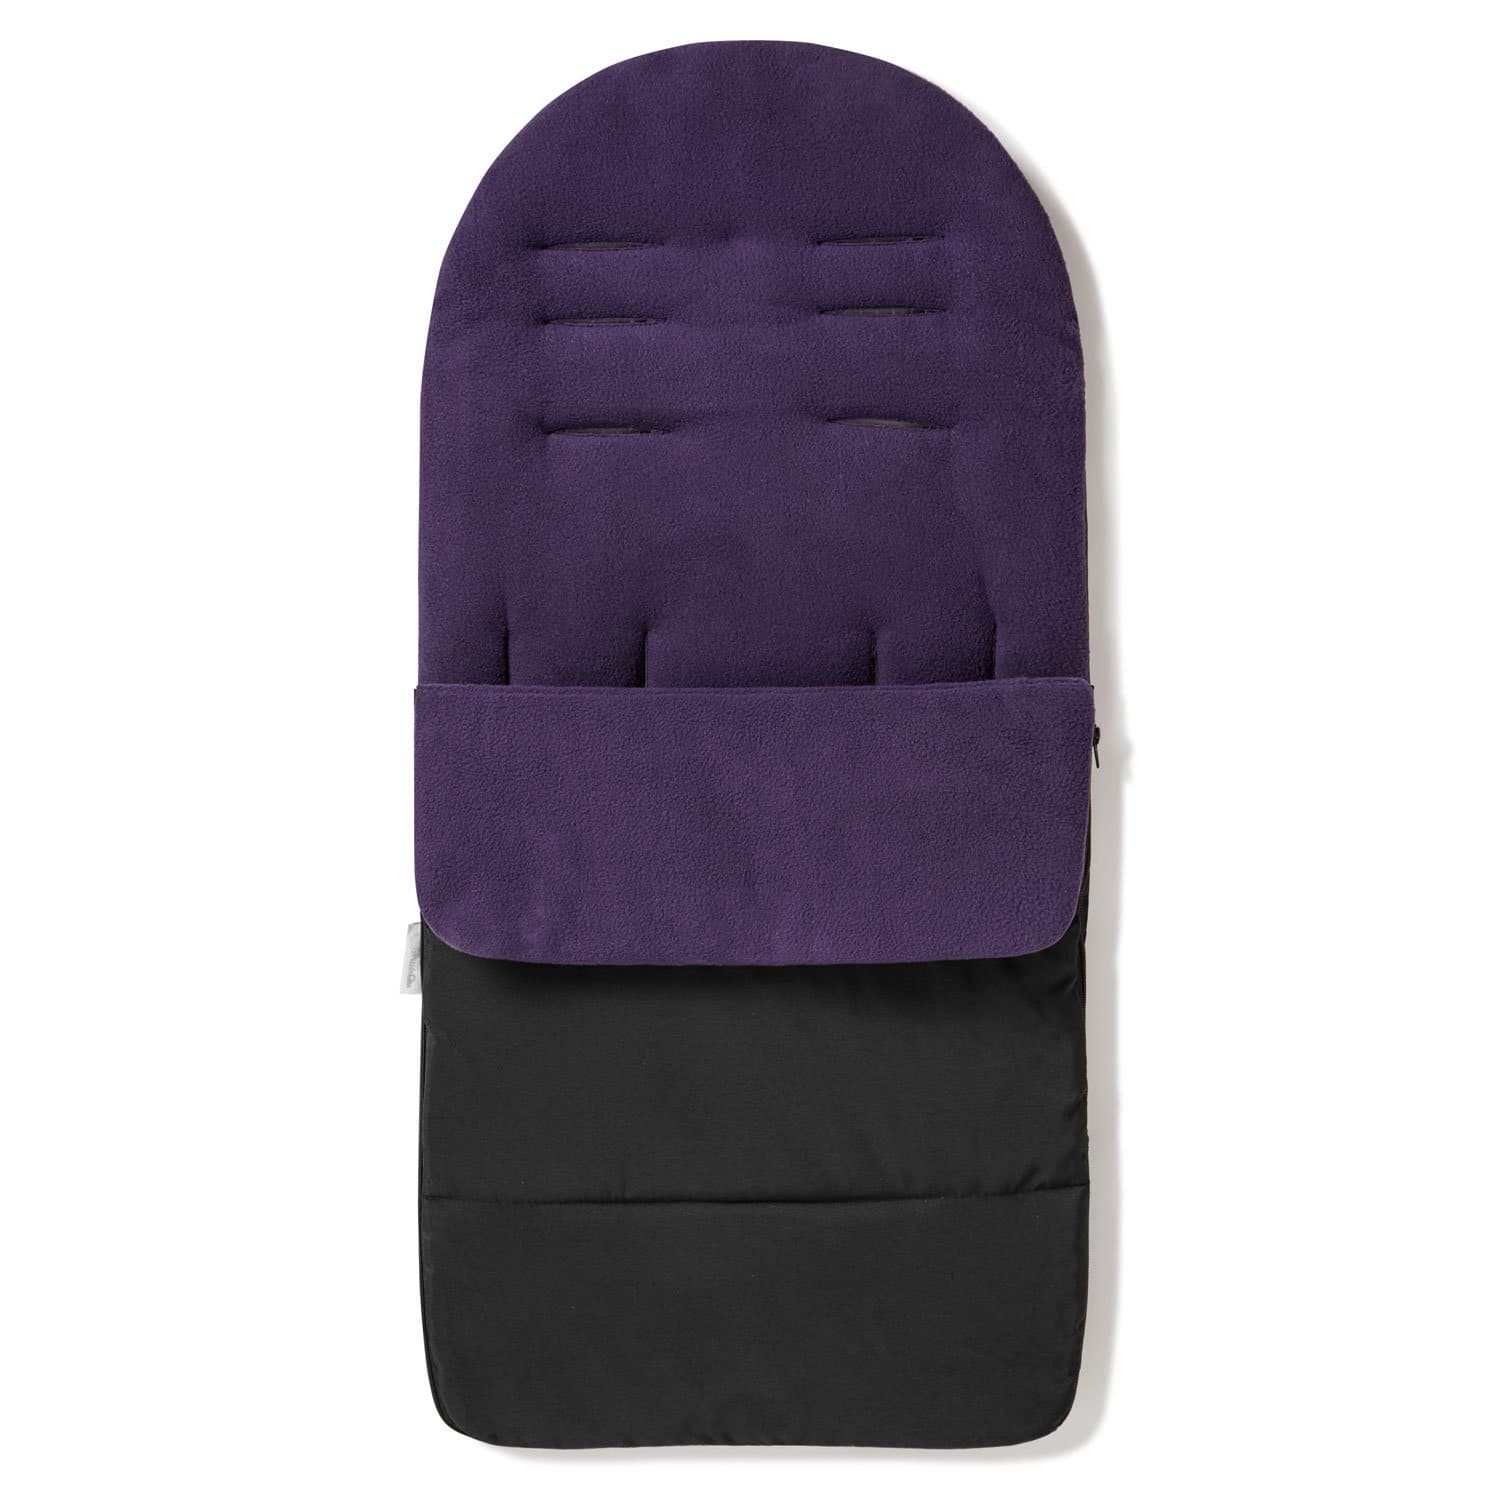 Premium Footmuff / Cosy Toes Compatible with ABC Design - Plum Purple / Fits All Models | For Your Little One